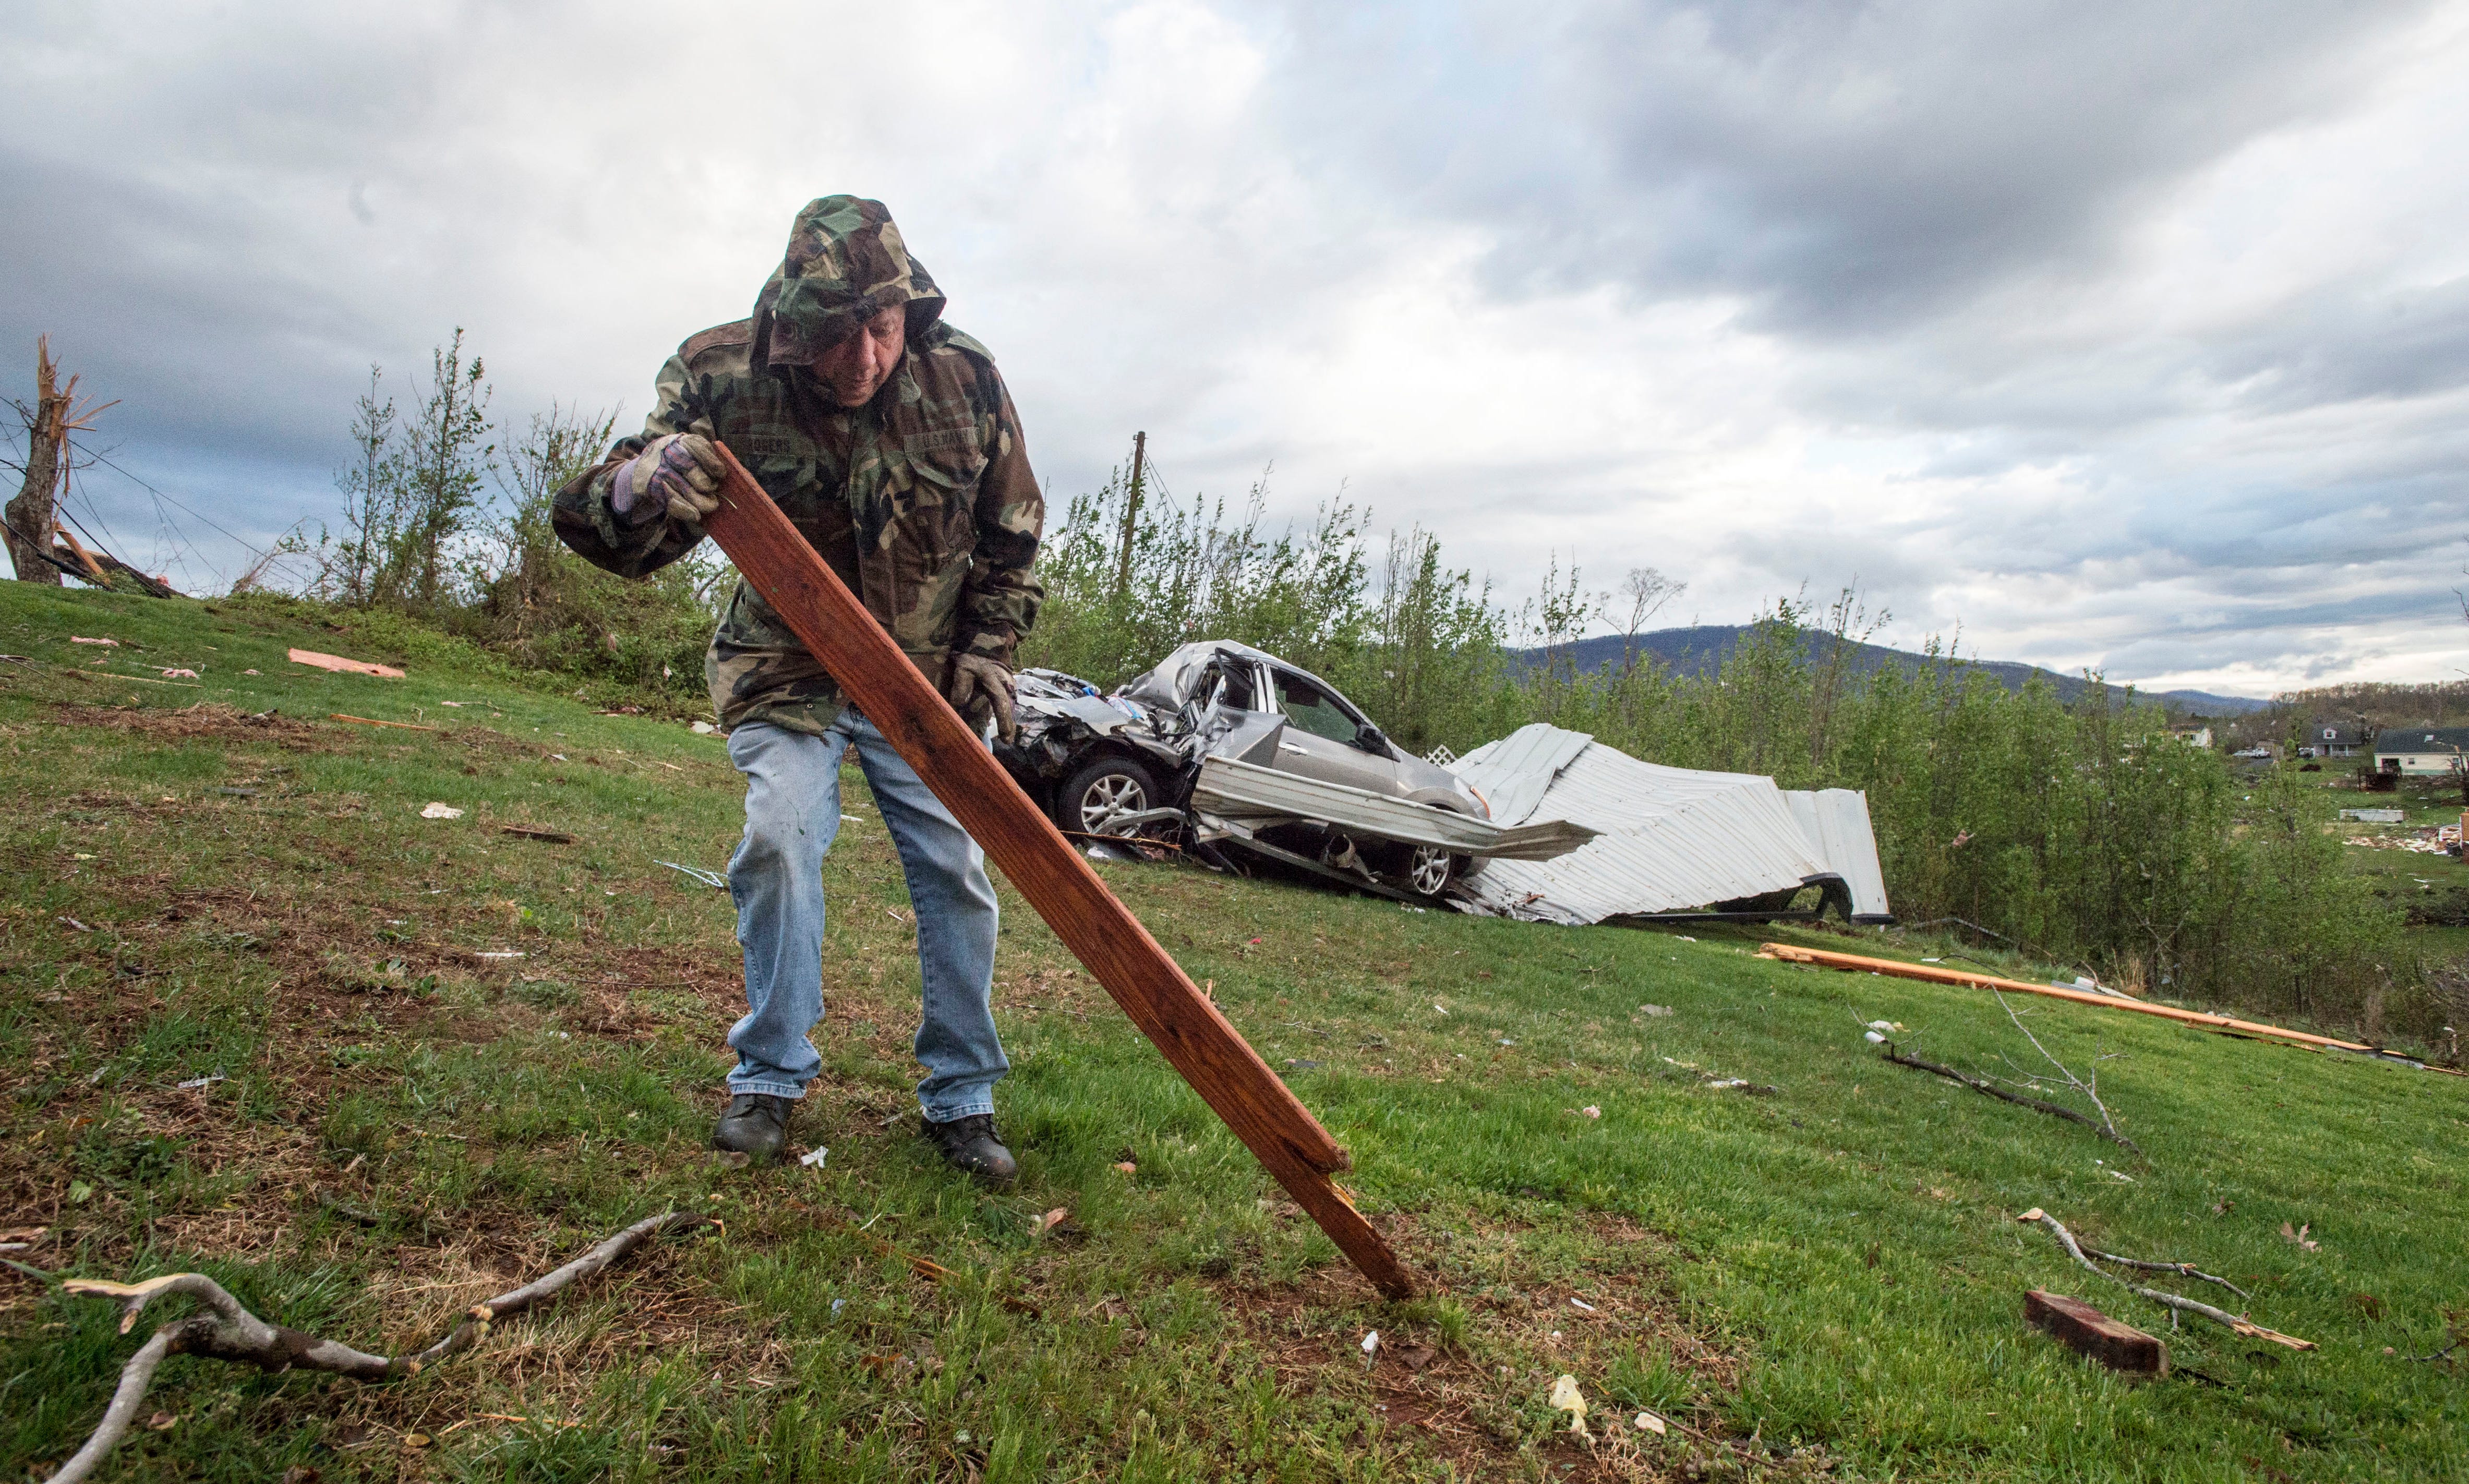 David Neighbors picks up debris after a storm on Monday, April 16, 2018, in Elon, Va.  Wild weather continued to pound much of the eastern U.S. on Monday morning, with flood watches and warnings in place across several states, all the way from West V